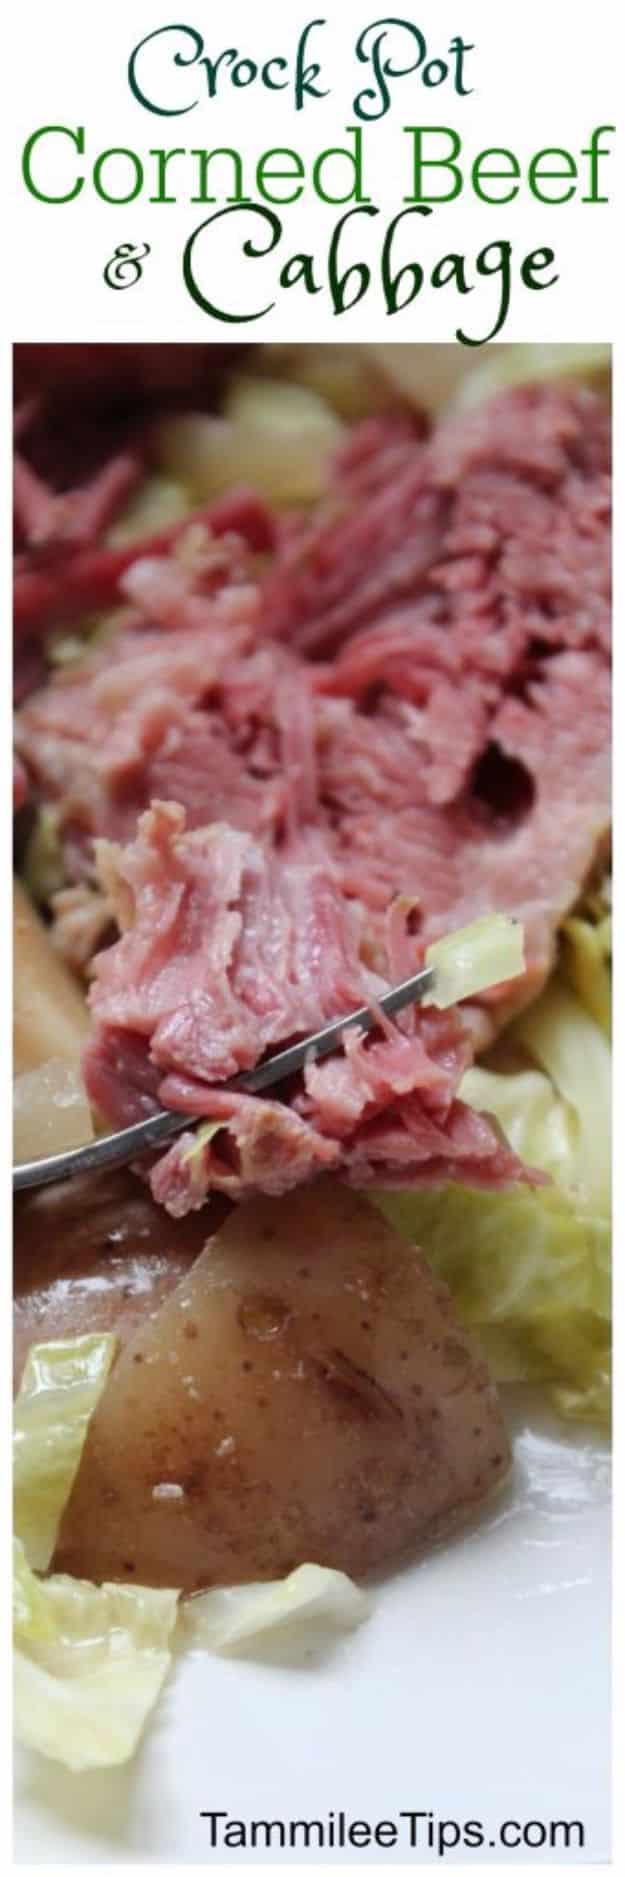 Best Recipes Made With Beer - Crock Pot Corned Beef and Cabbage - Easy Dinner, Lunch and Snack Recipe Ideas Made With Beer - Food for the Slow Cooker and Crockpot, Meat and Chicken Dishes, Appetizers, Homemade Pretzels, Summer BBQ Sauces and PArty Food Ideas 